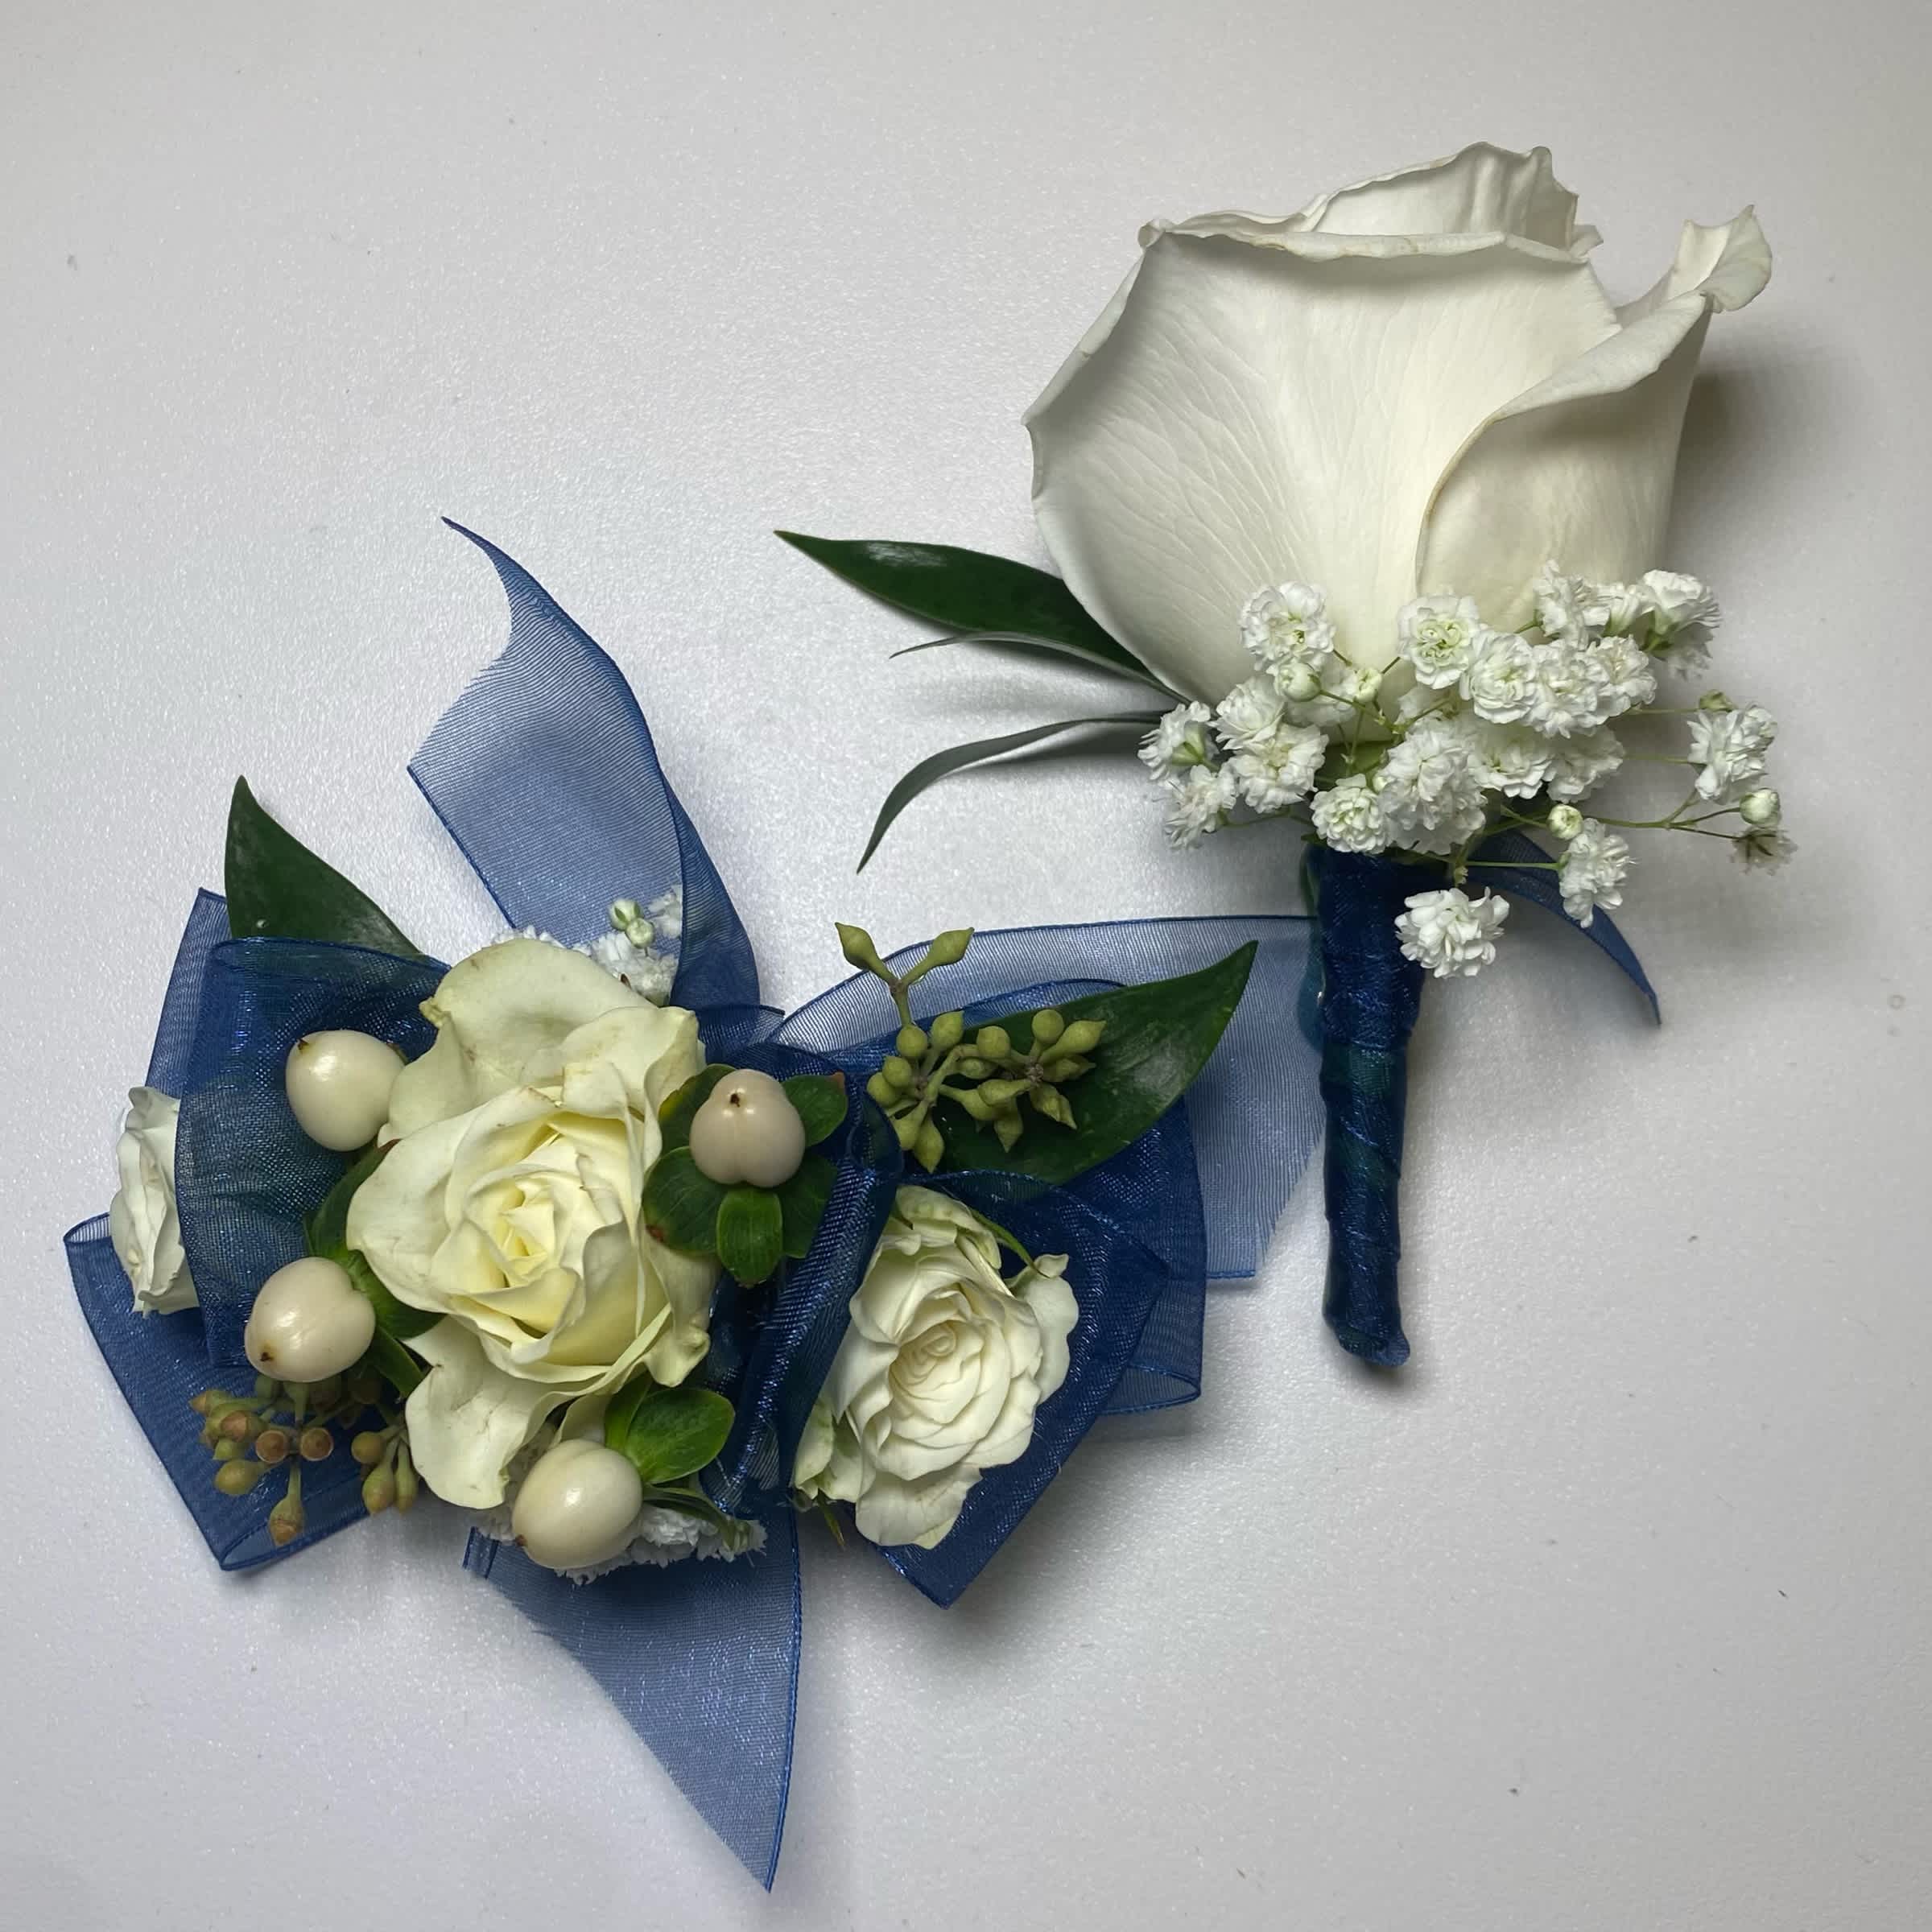 Navy Blue Set - Prom/ Wedding - This White Rose Corsage and Boutonniere Includes an Adult Size Elastic Wristband Corsage and Magnetic Boutonniere with Navy Blue Chiffon Ribbon. The Corsage Includes White Spray Roses, Hypericum Berries, Gentle Greenery and Seeded Eucalyptus. The Boutonniere includes a White Rose with Babies Breath and Gentle Greenery. Or as Similar as Possible.